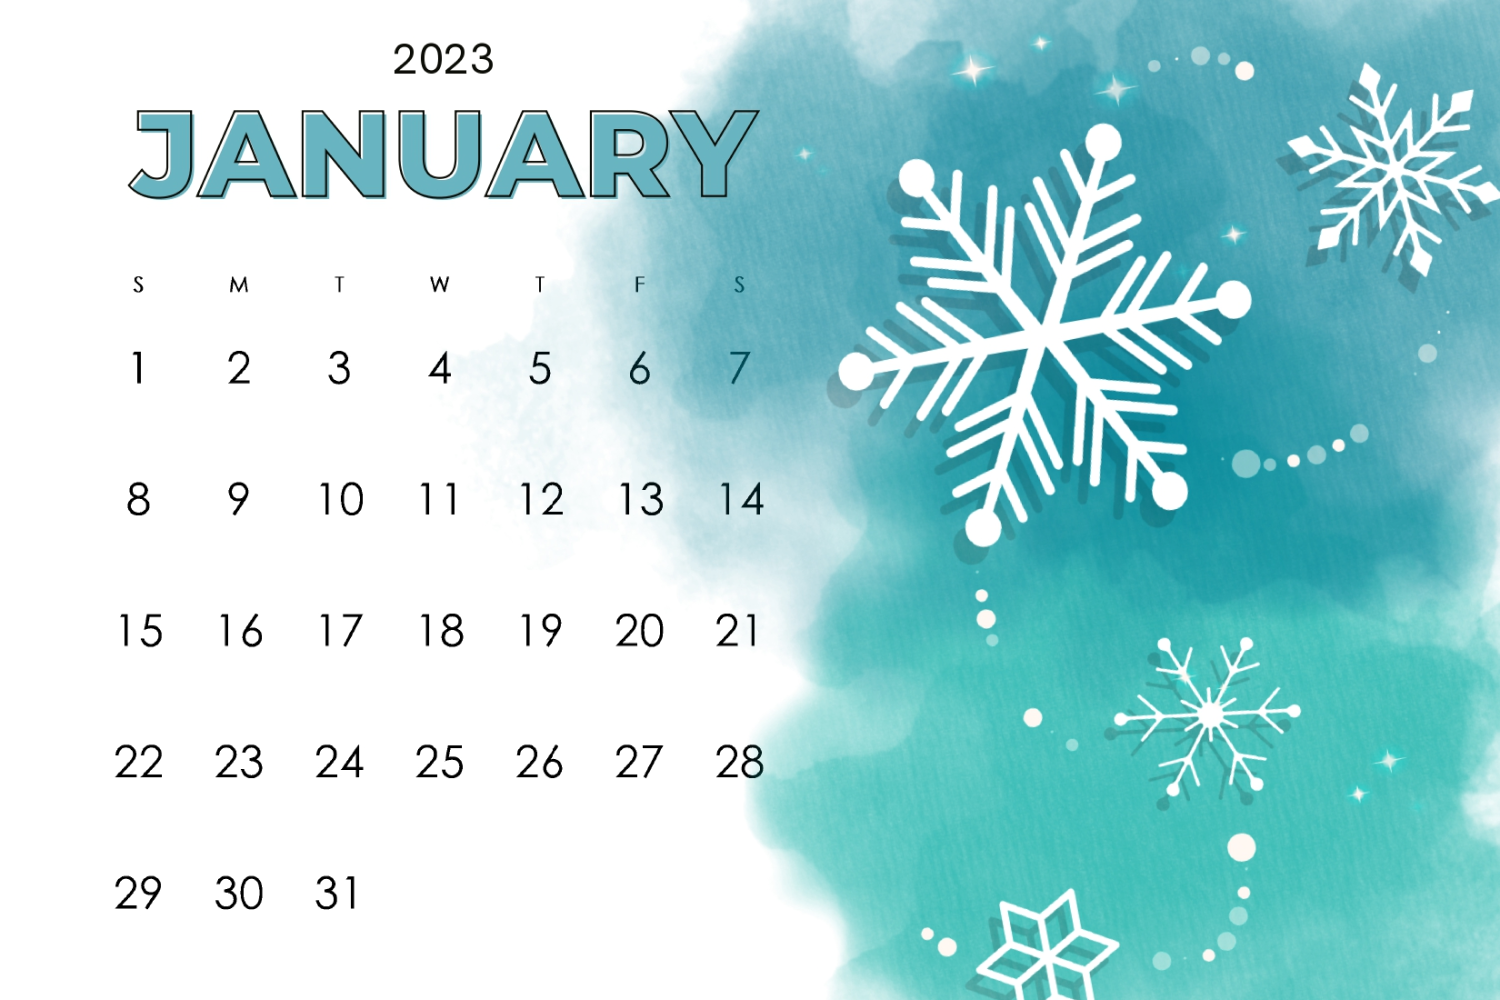 January calendar with snowflakes, cheerful colors, and plenty of space.